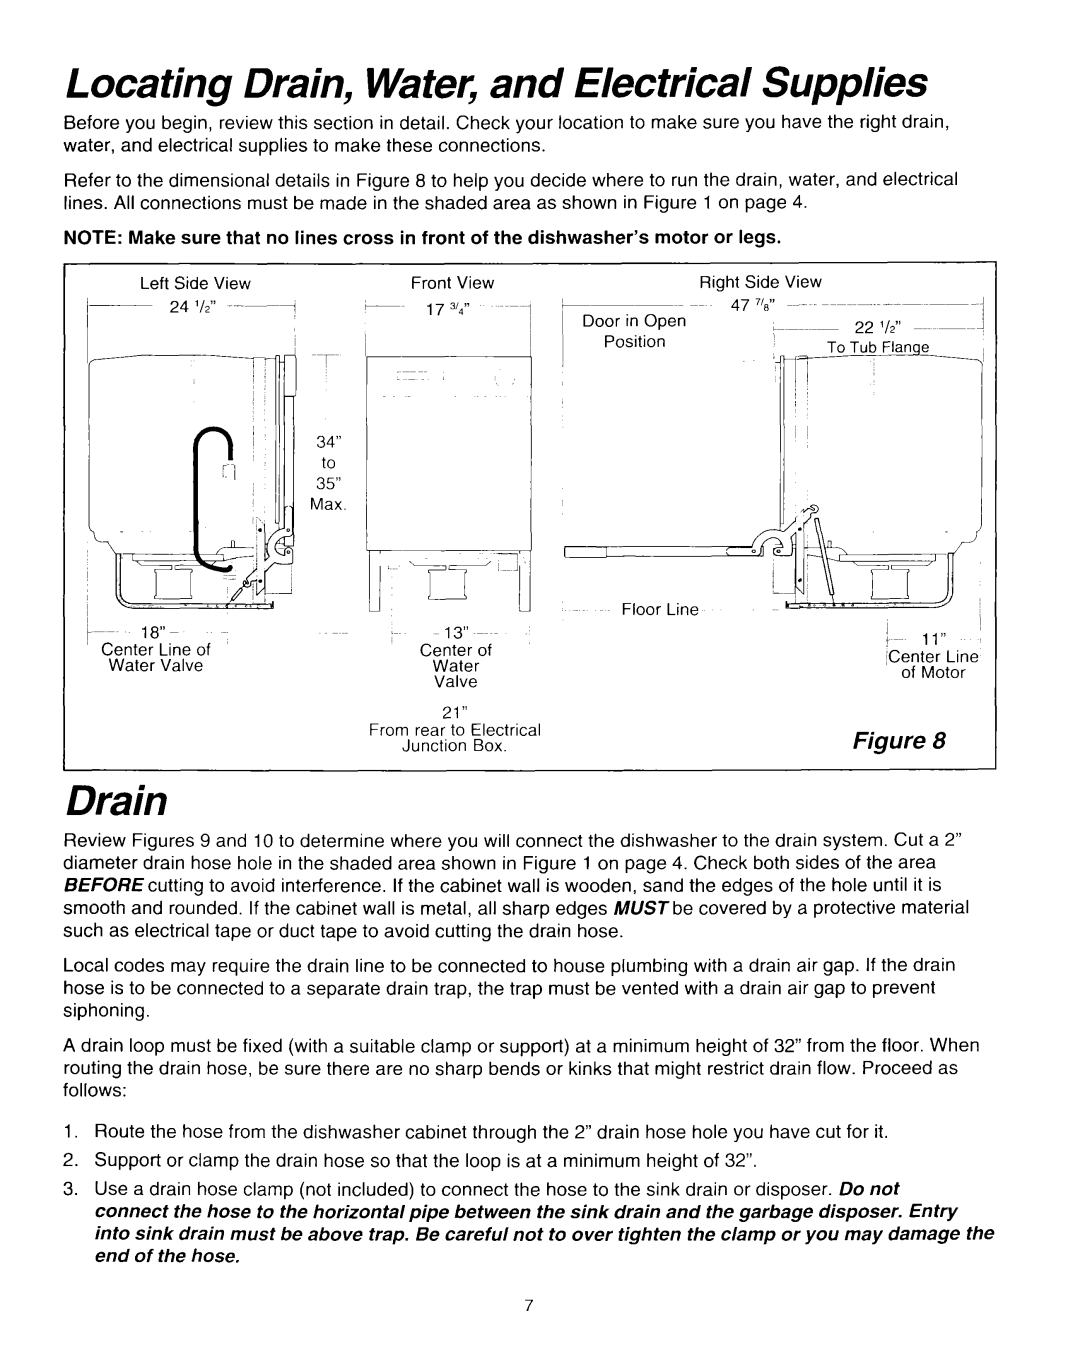 Whirlpool RUD0800EB installation instructions Locating Drain, Water, and Electrical Supplies, I--~‘8” 